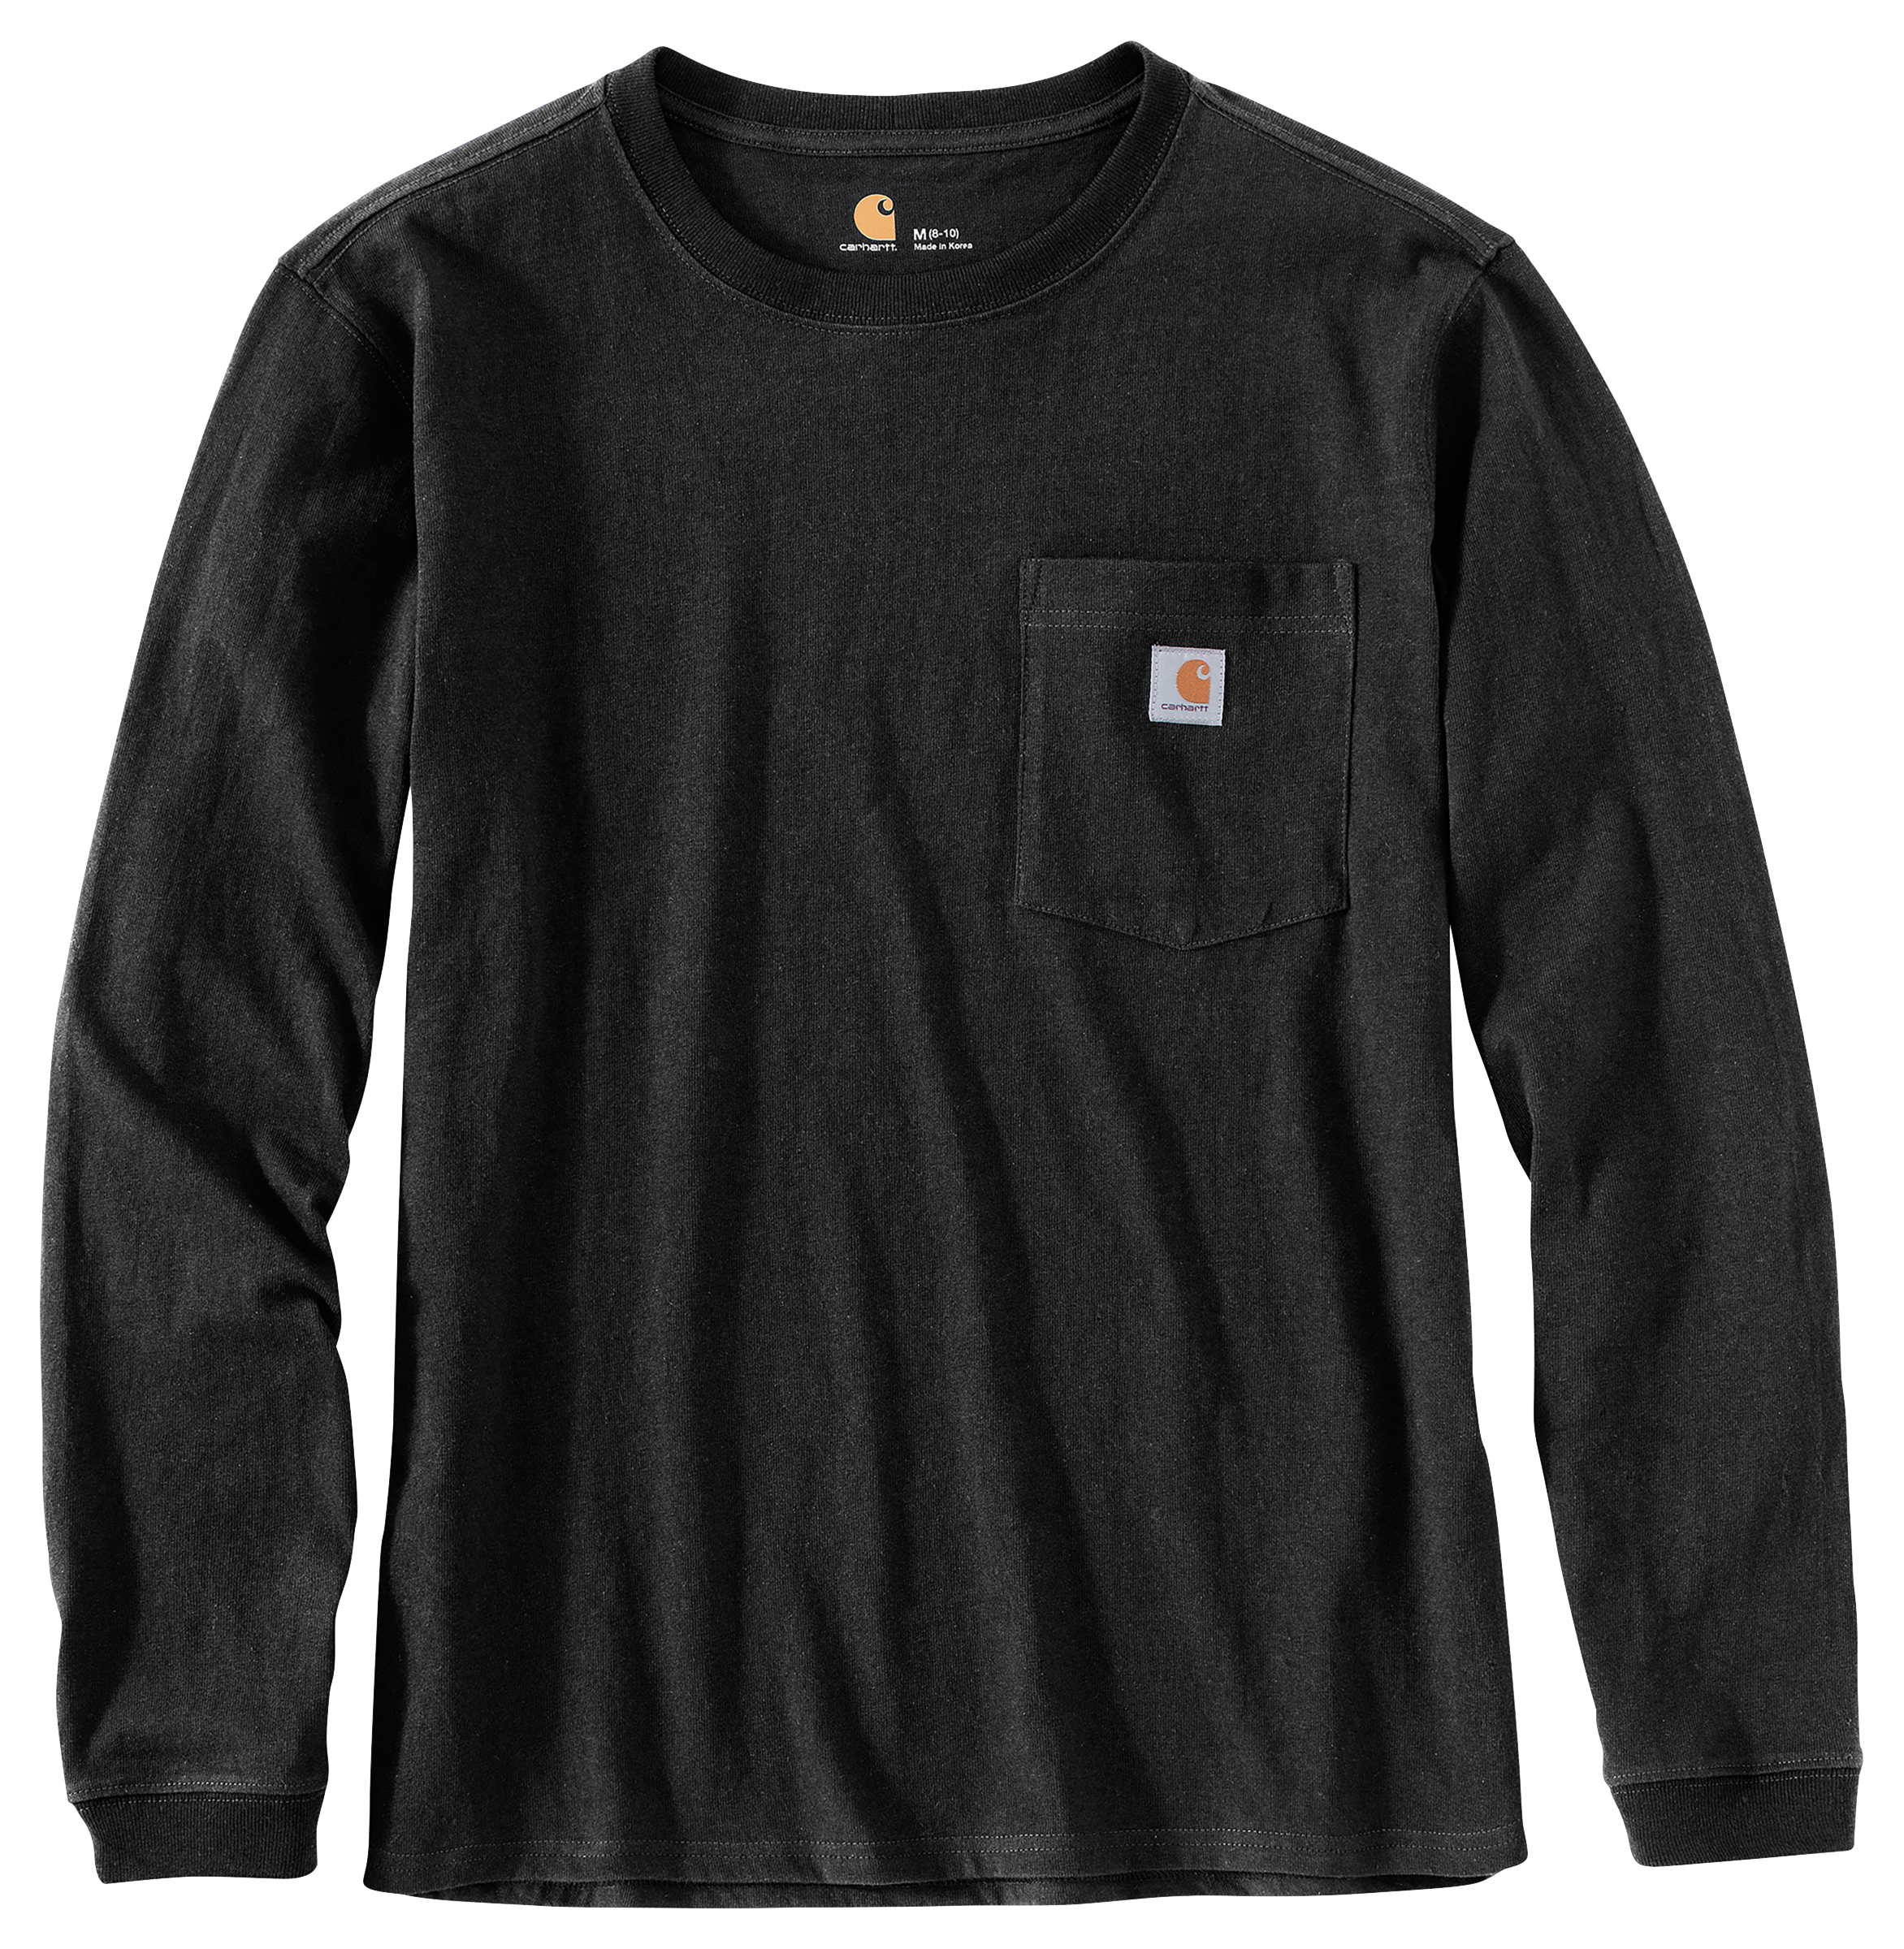 Carhartt Loose-Fit Heavyweight Long-Sleeve Pocket T-Shirt for Ladies ...